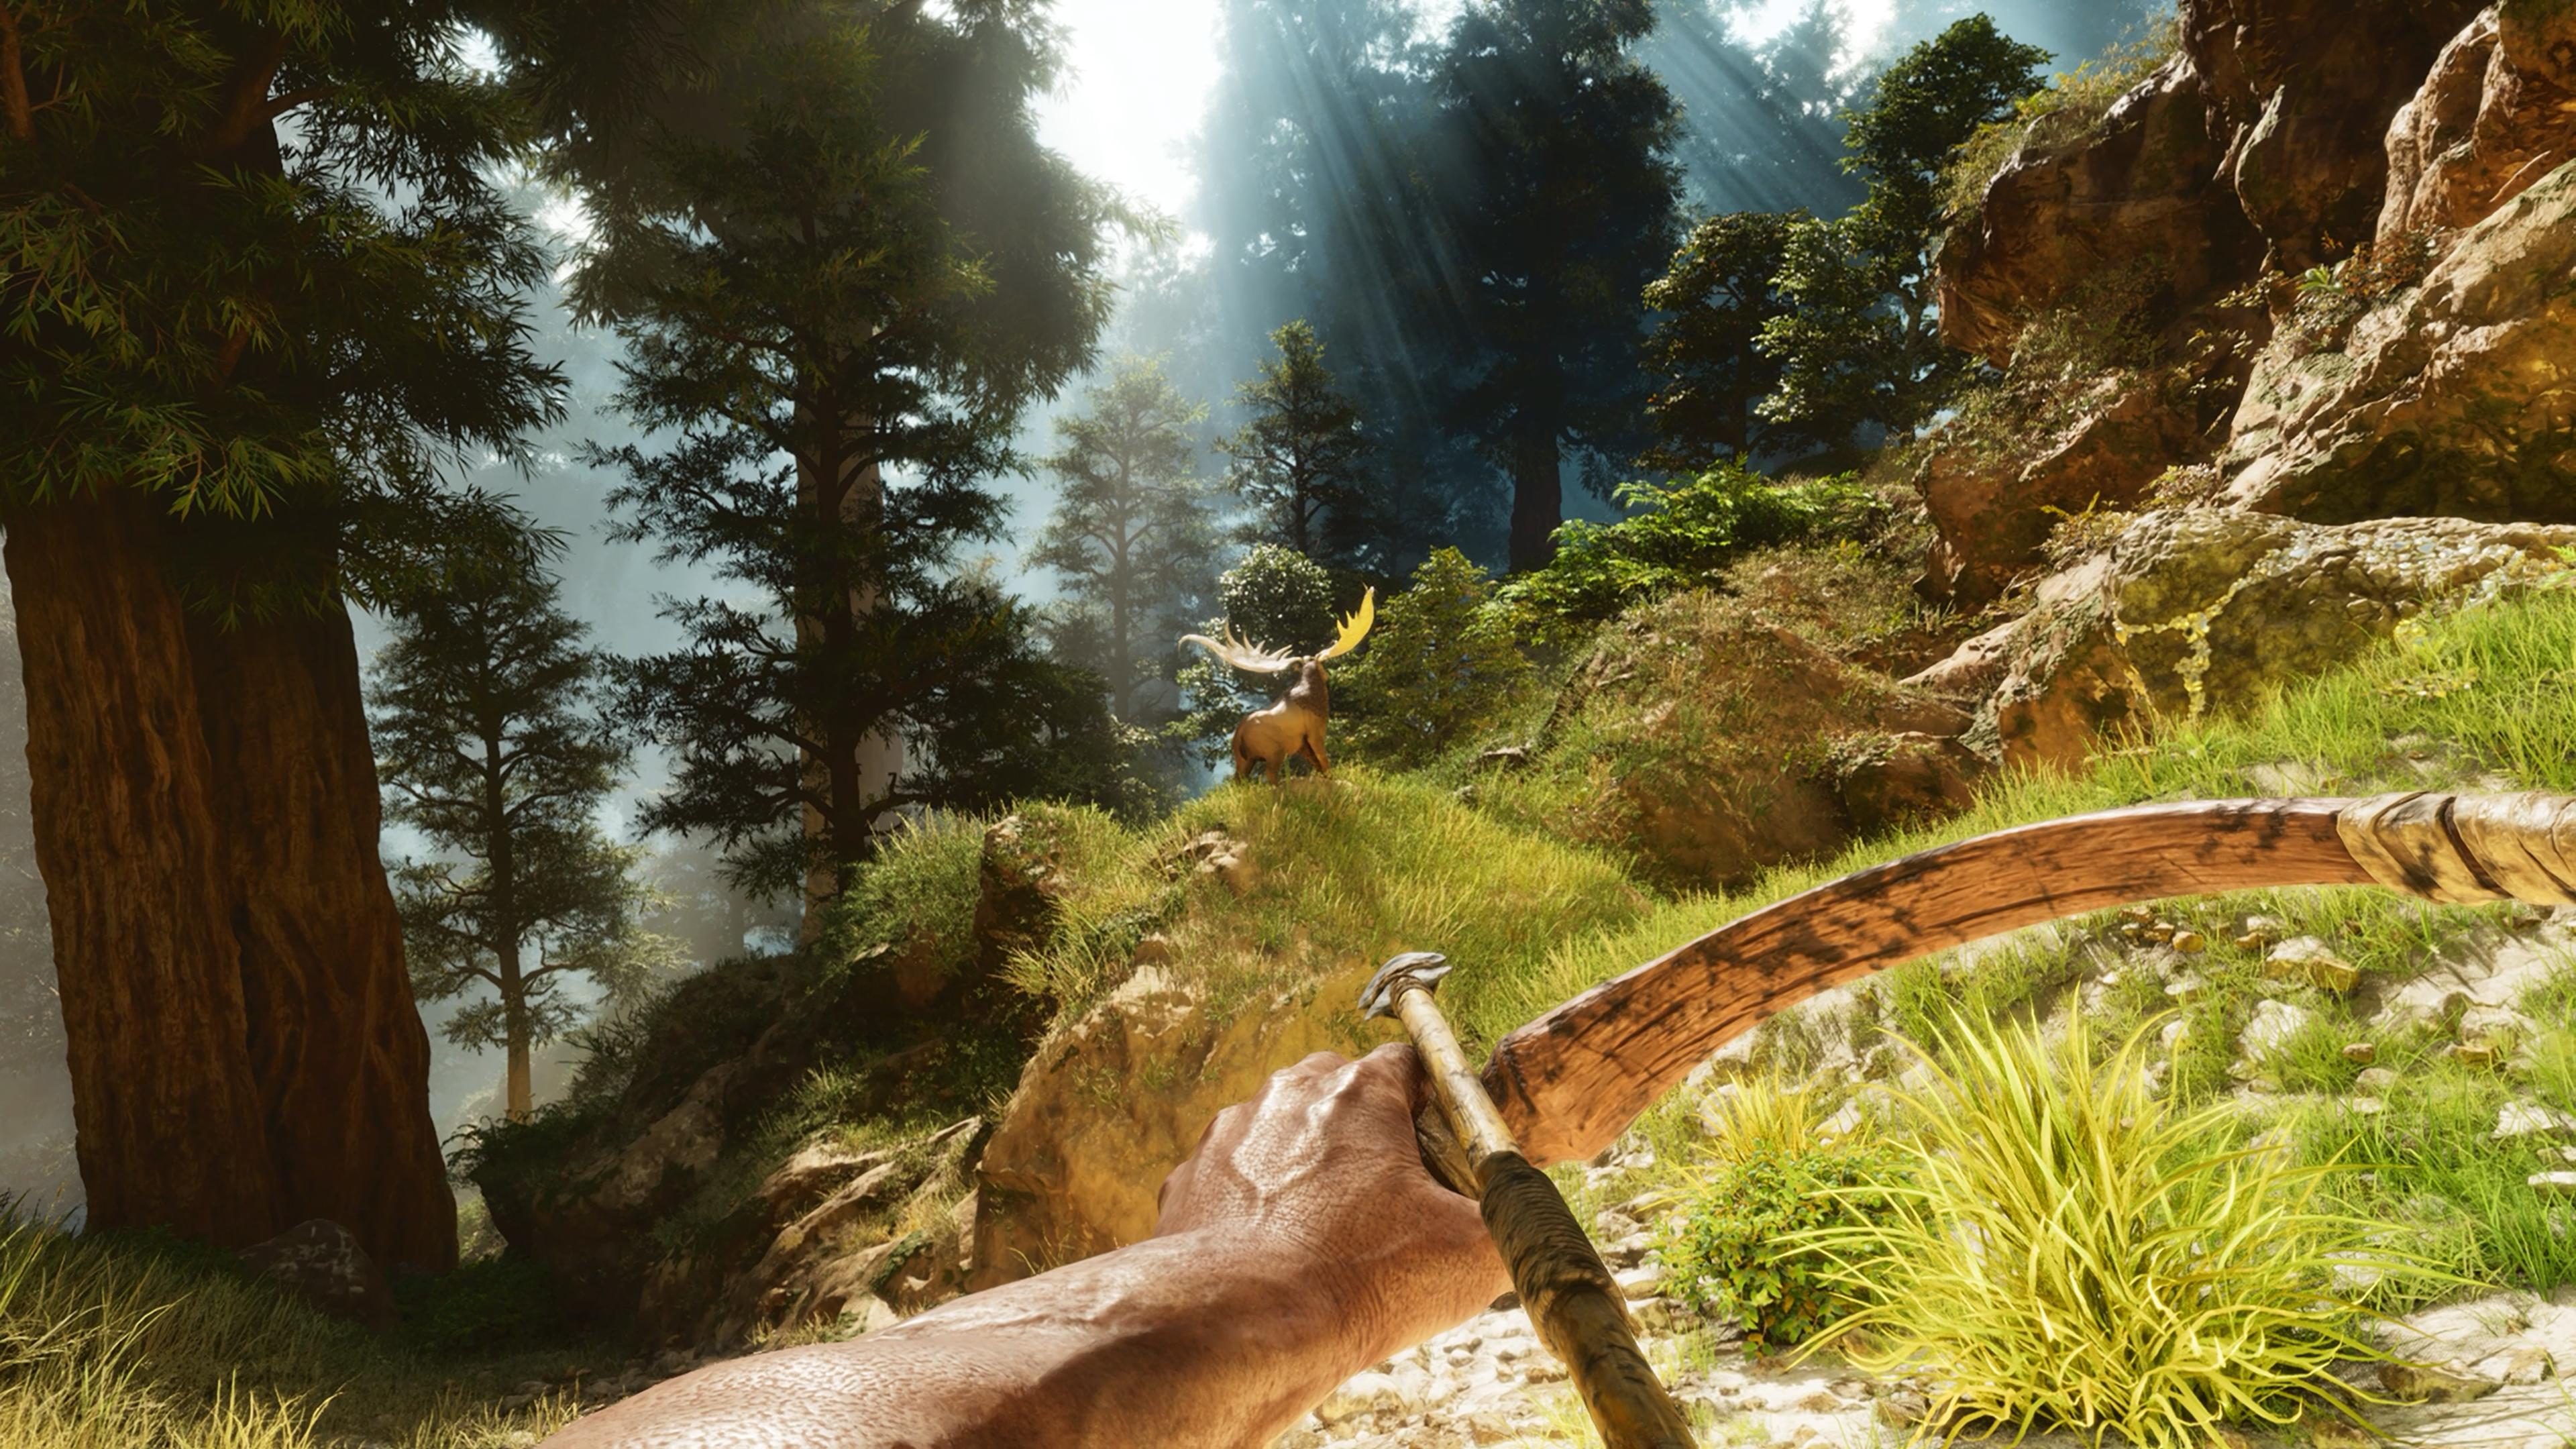 Is The Forest Cross-Platform and Offers Crossplay?